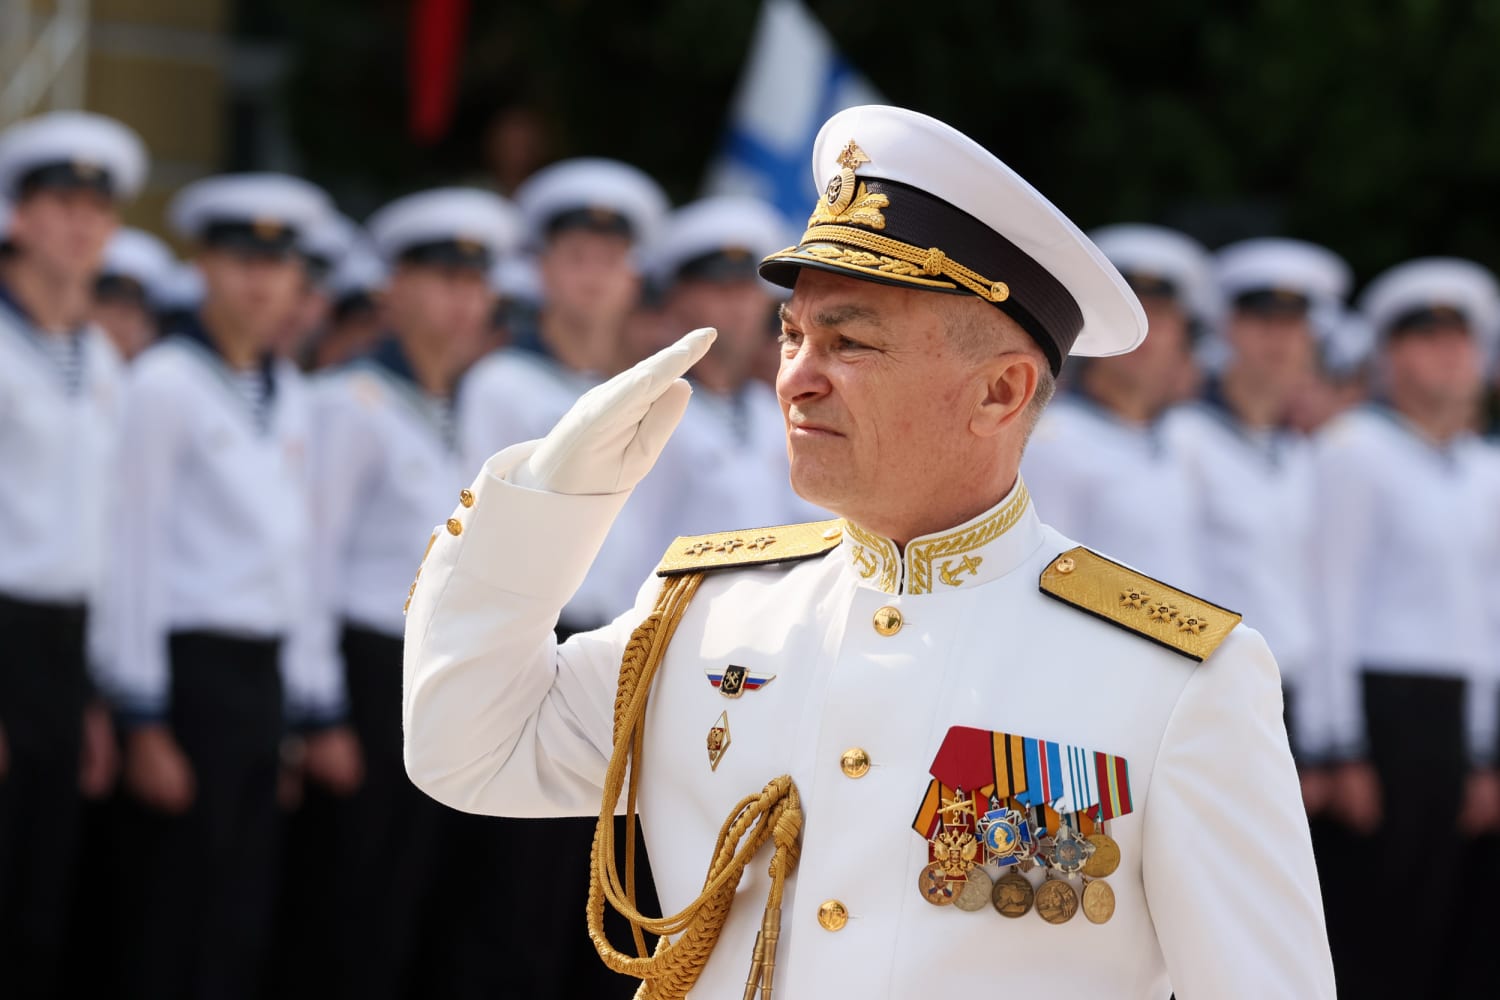 The commander of the Russian Black Sea Fleet was seen in a meeting after Ukraine said it killed him